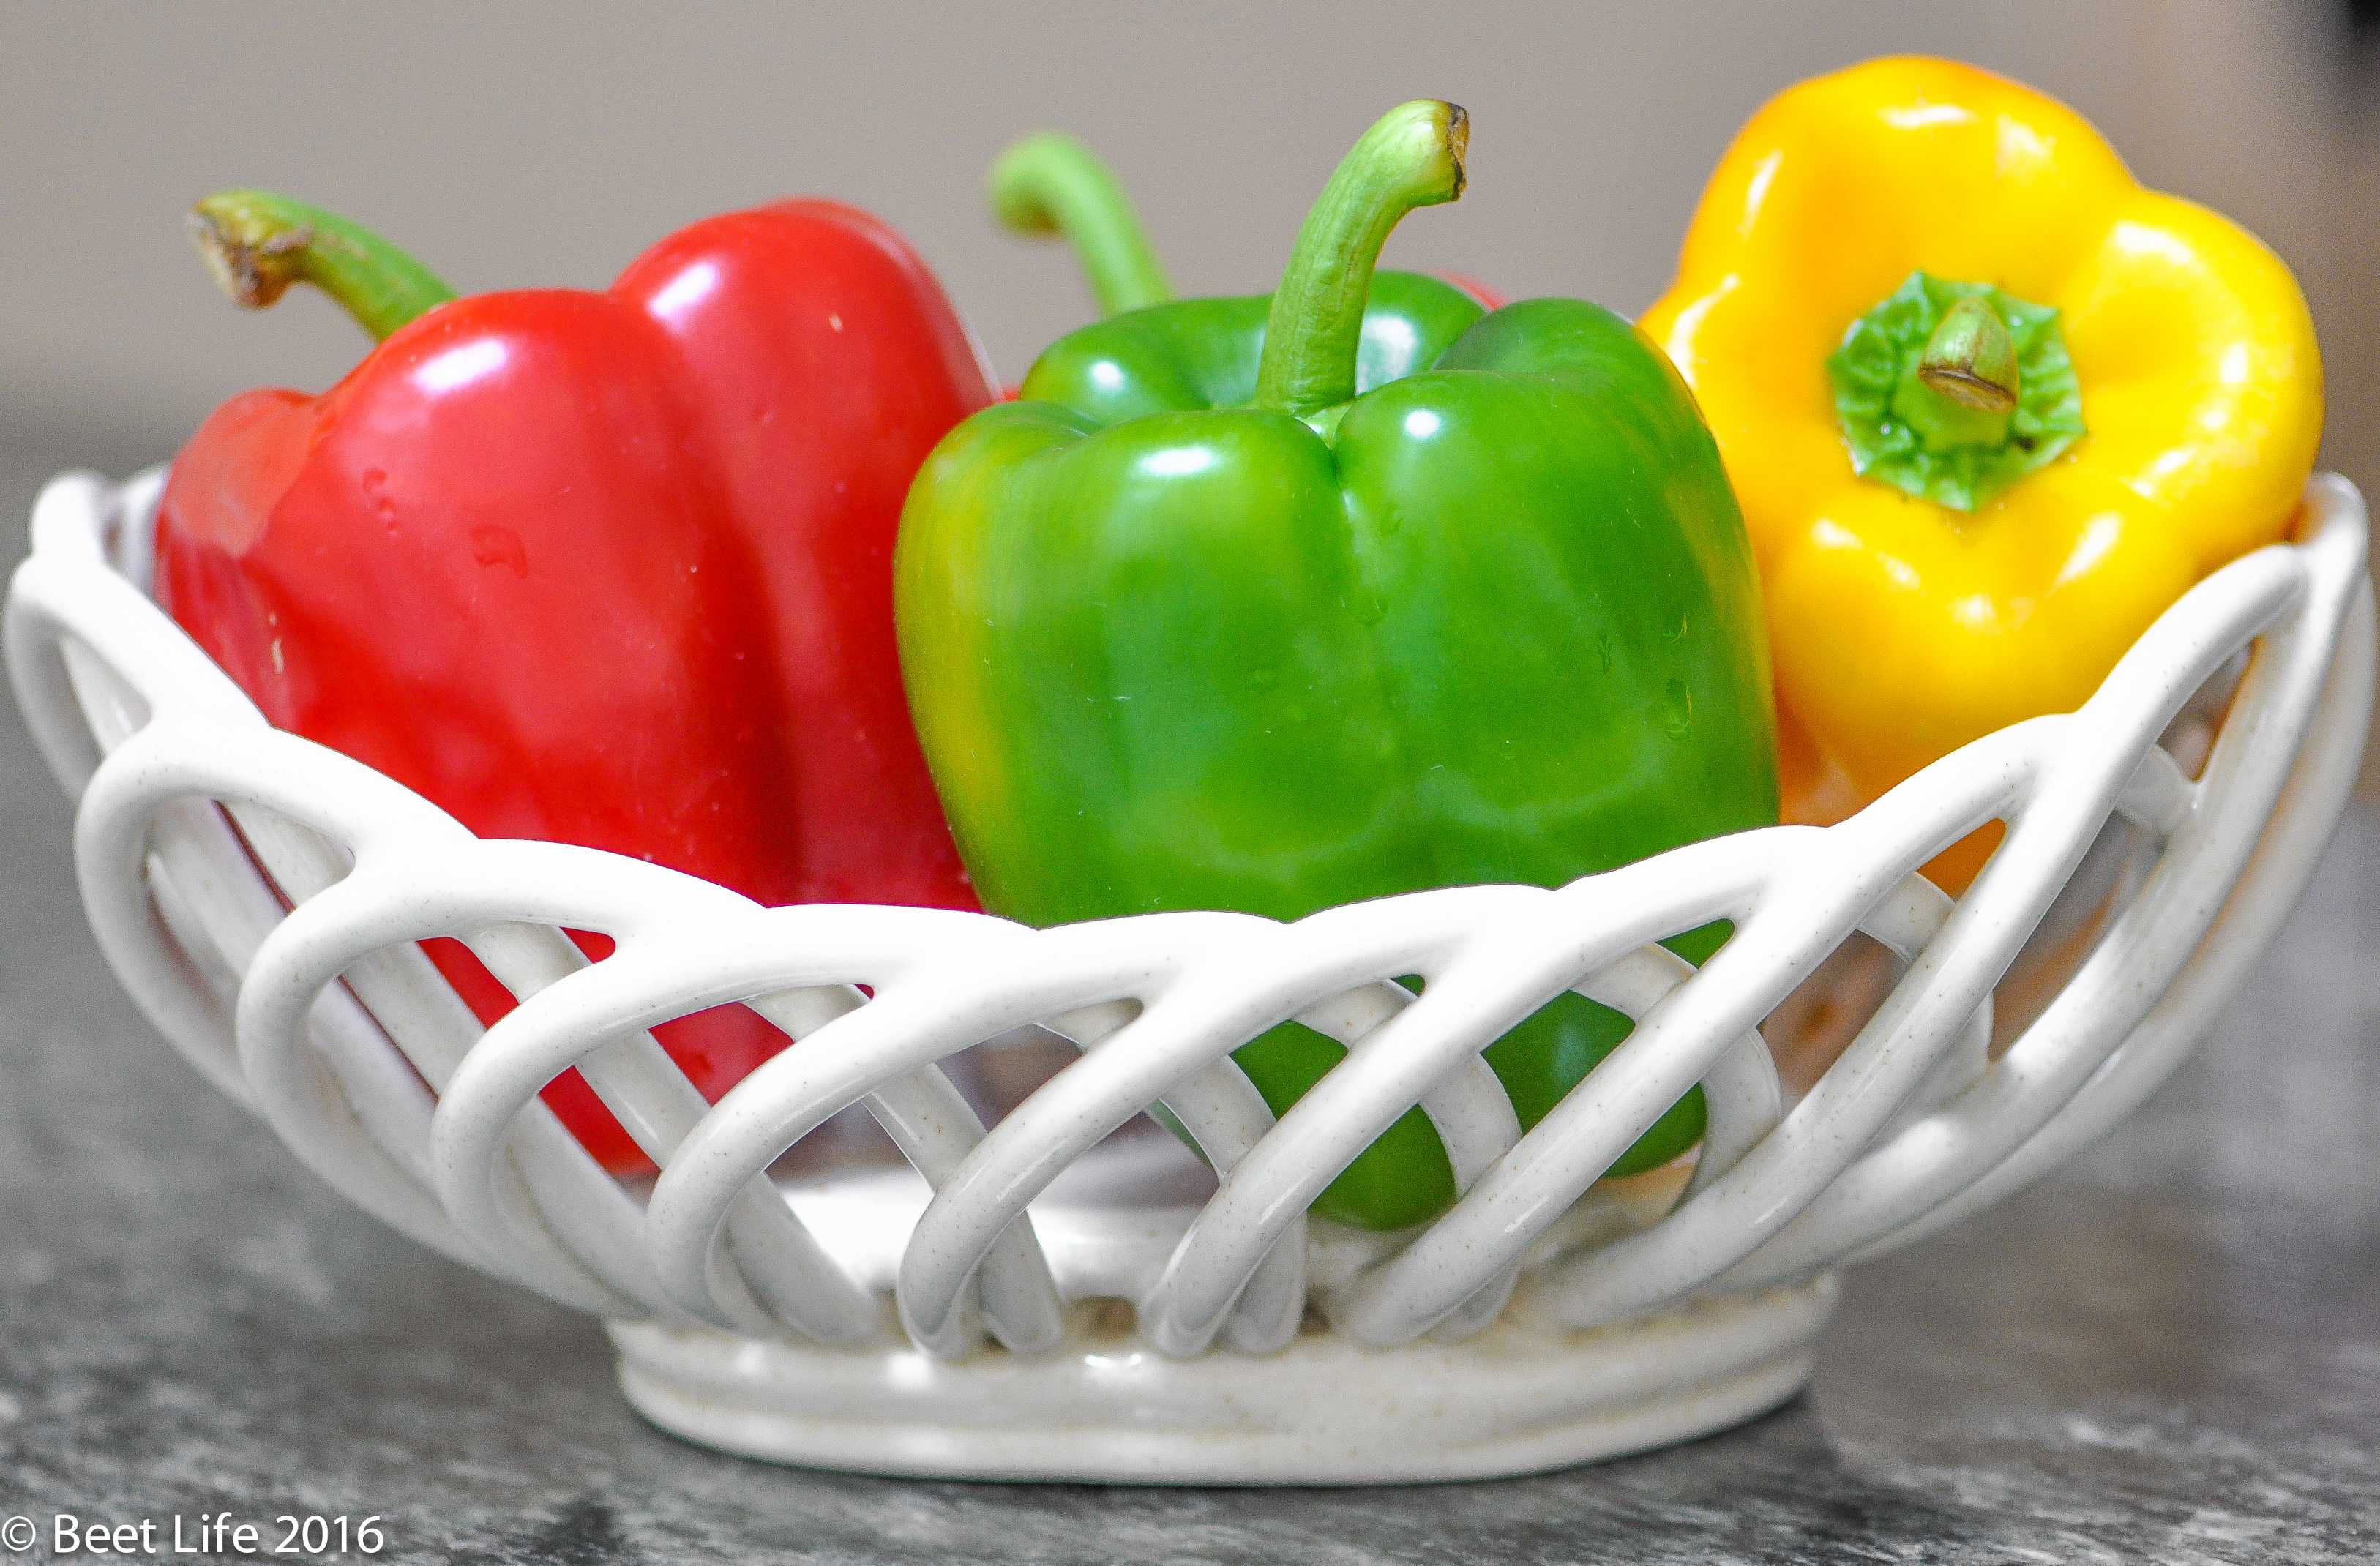 All About Bell Peppers - How to Pick, Prepare & Store